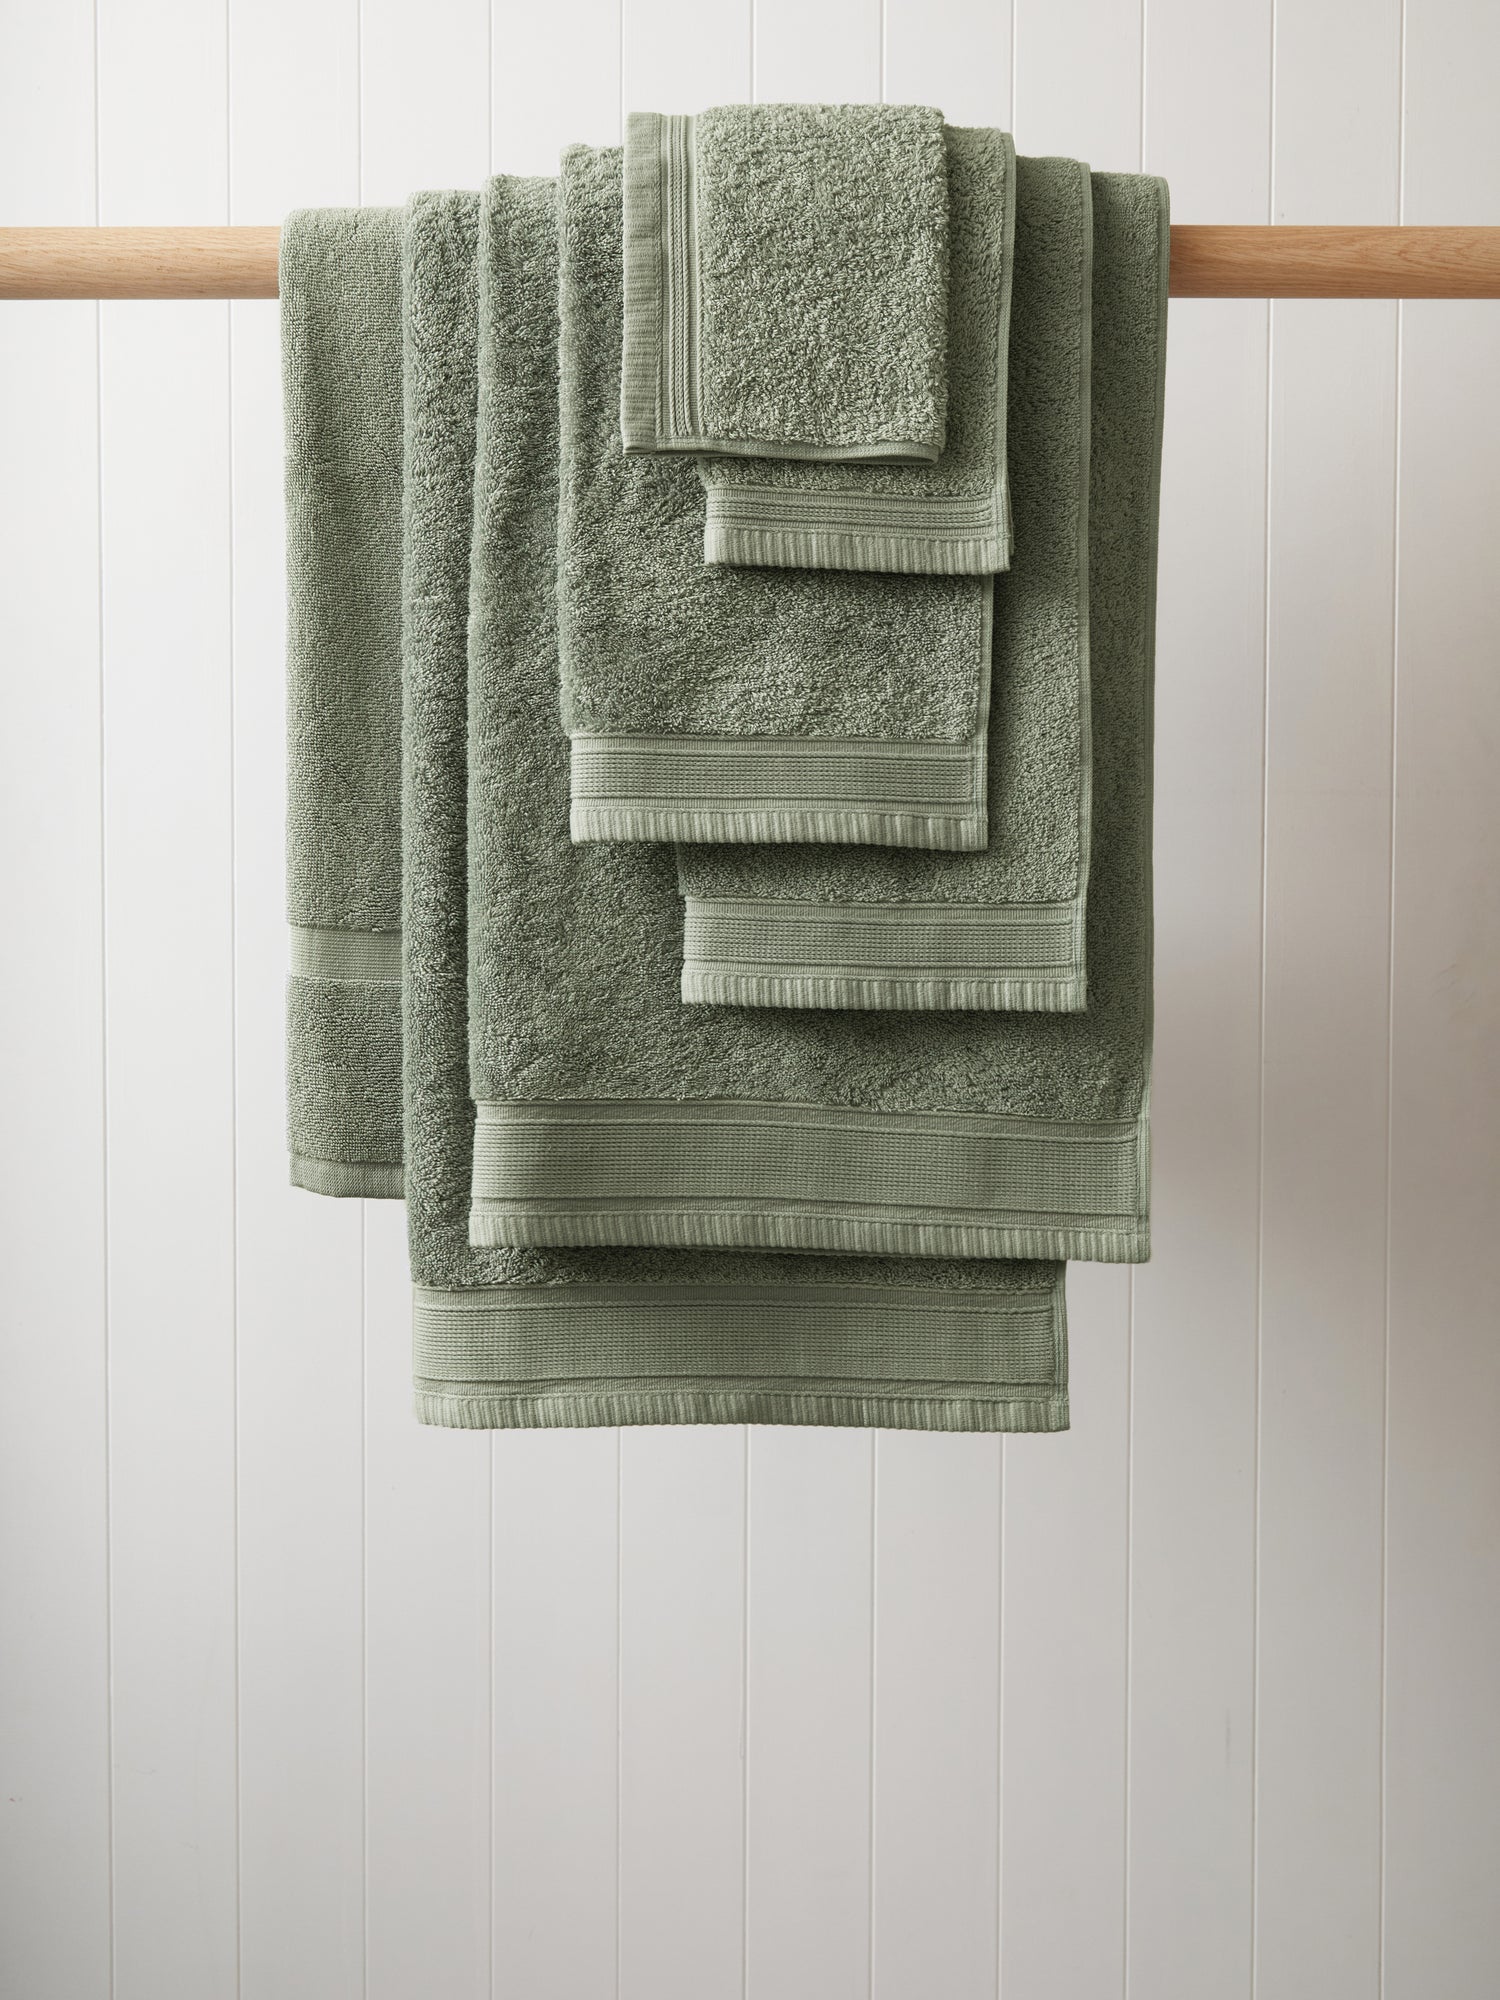 https://www.wallacecotton.com/content/products/oasis-towel-set-fern-1-5765.jpg?width=1500